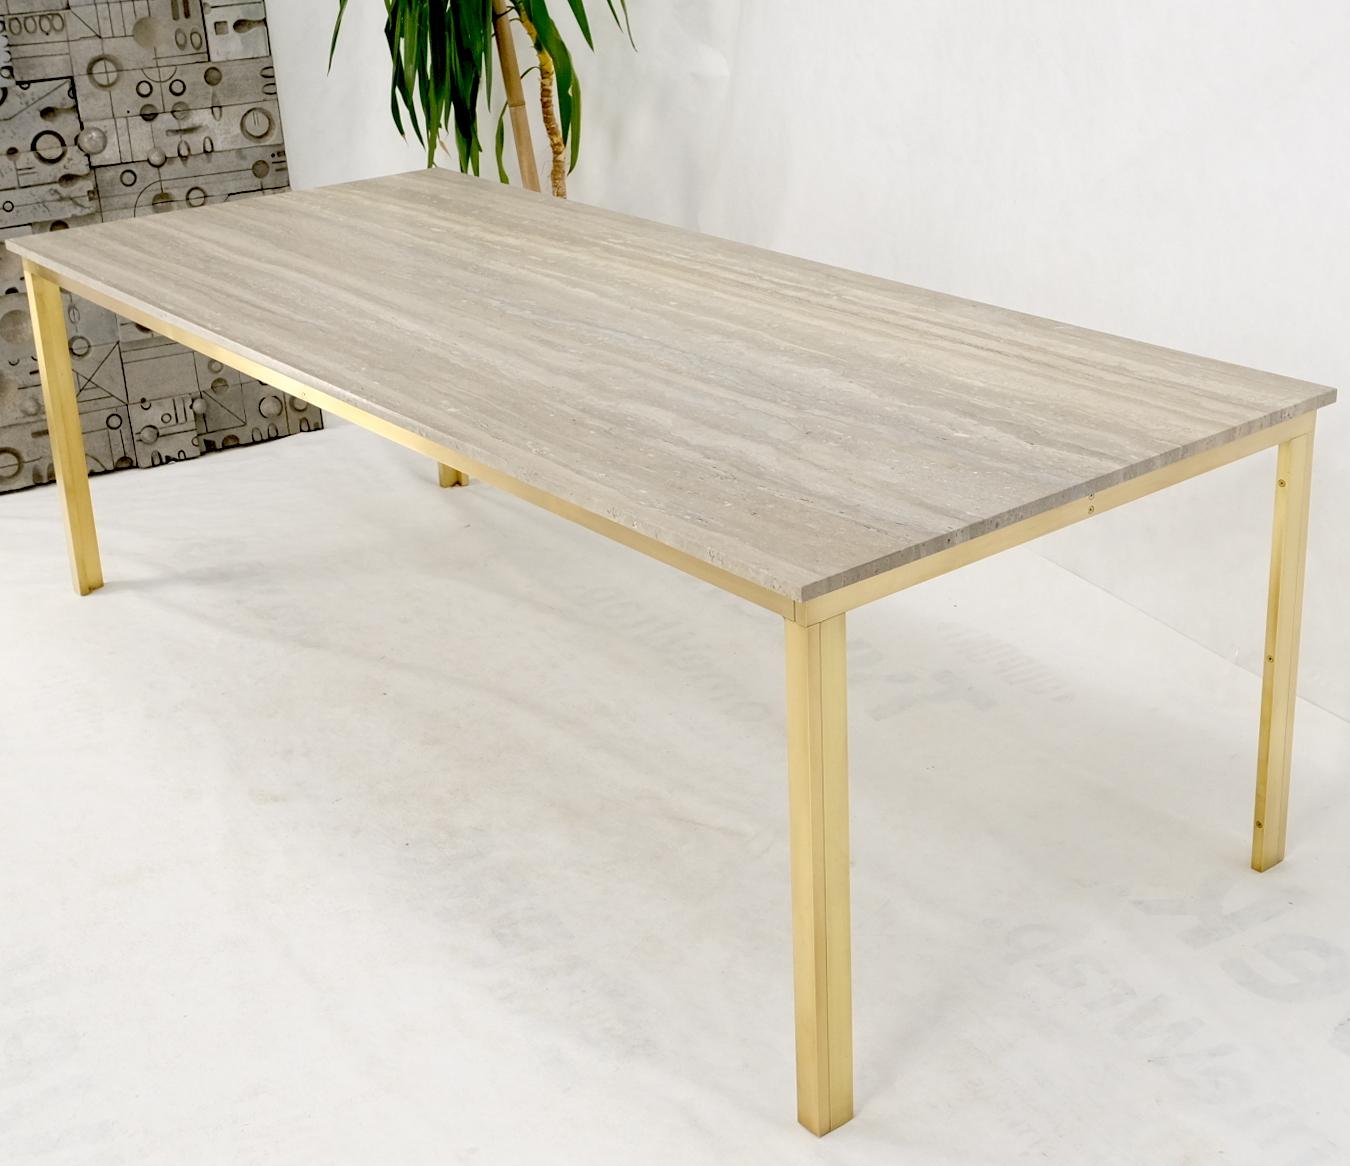 Large heavy solid brass base 8' long Travertine top rectangle dining table.
Studio made heavy solid brass base travertine top conference table.